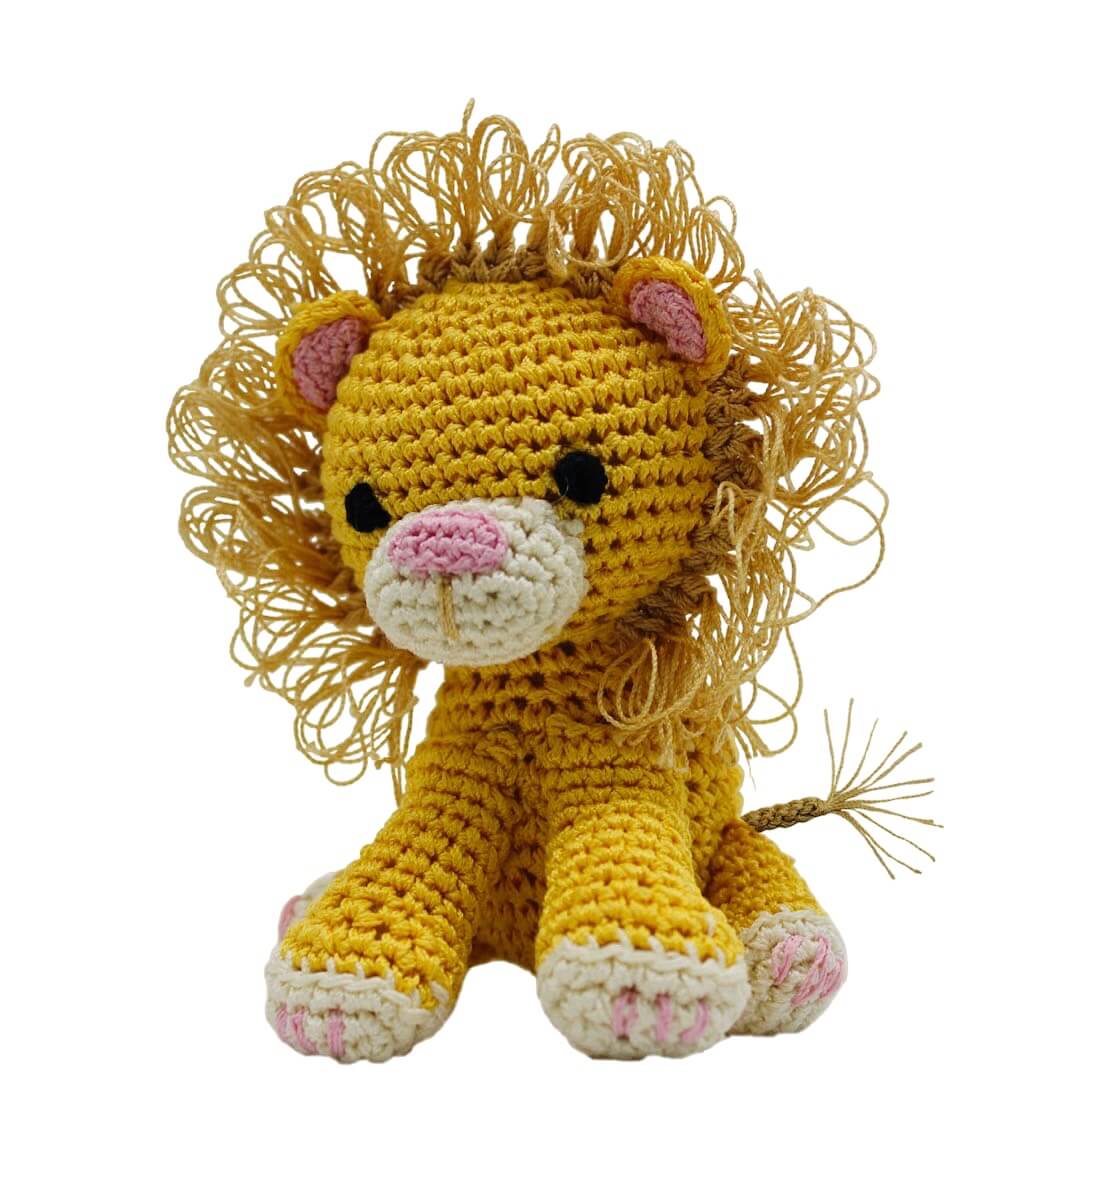 Knit Knacks "King Cuddles the Lion" handmade organic cotton dog toy. Yellow lion with a sweet face, and a fringed mane and tail.